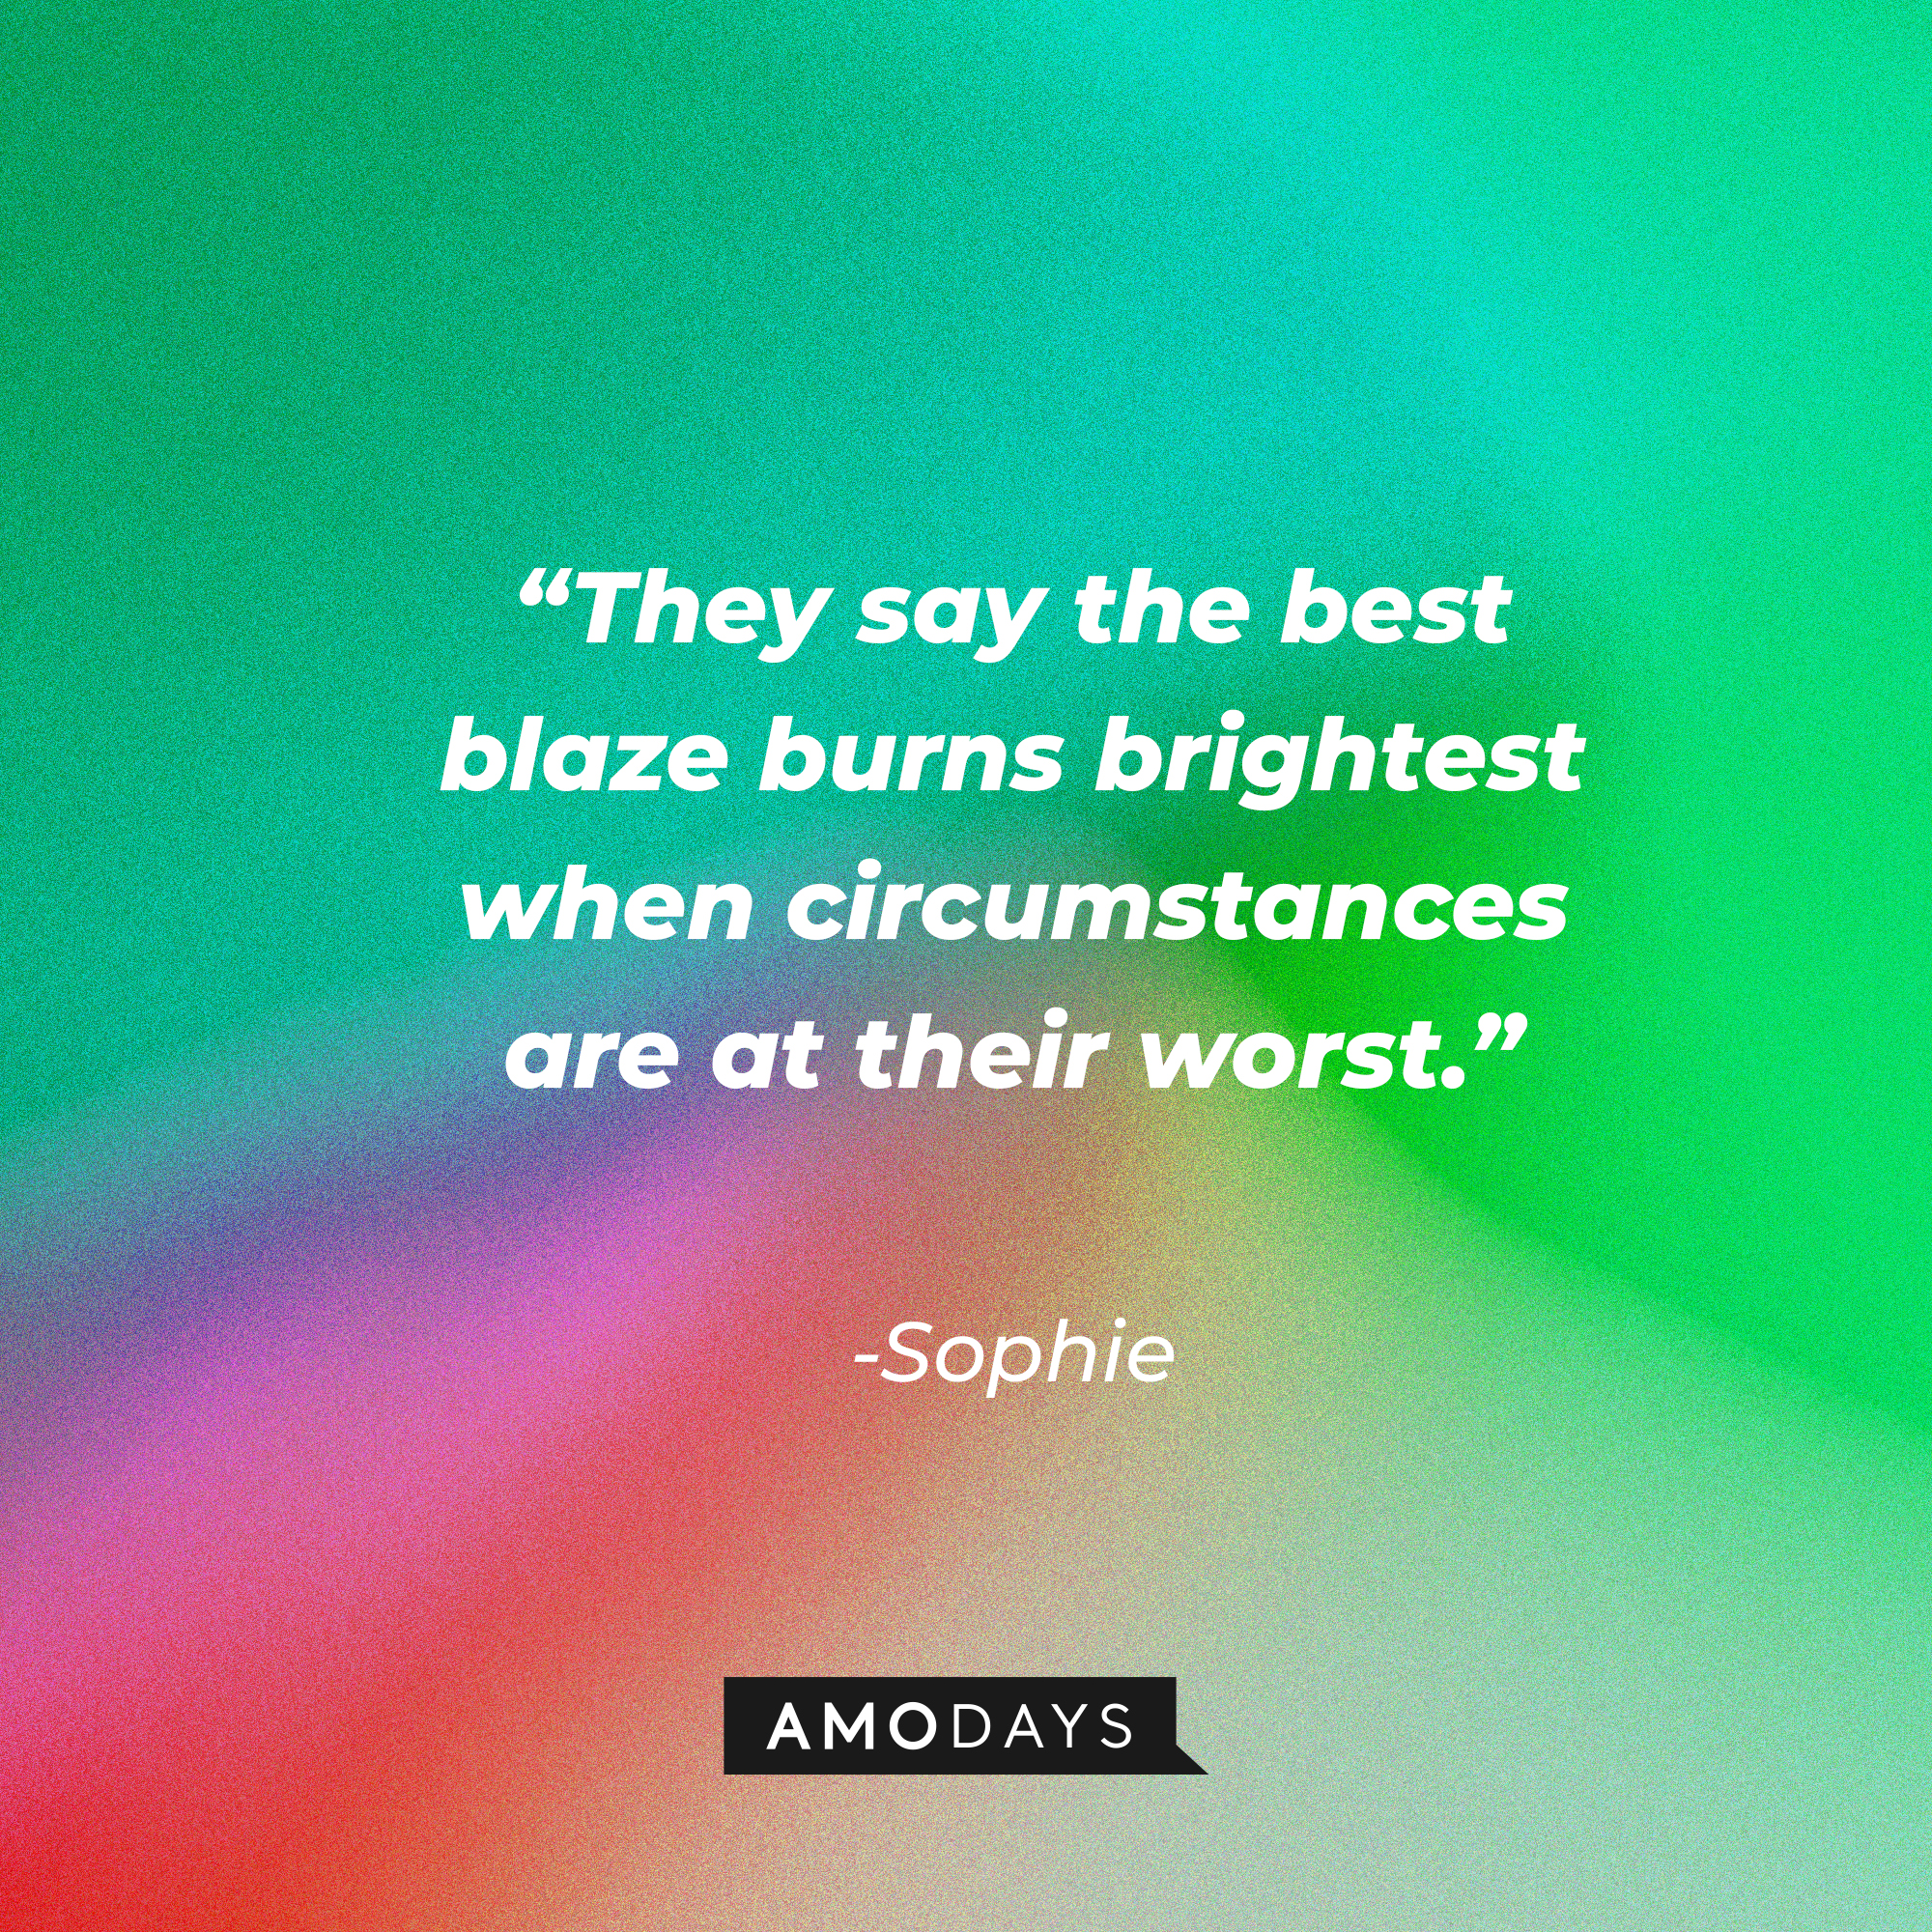 Sophie's quote: ”They say the best blaze burns brightest when circumstances are at their worst.” | Source: AmoDays